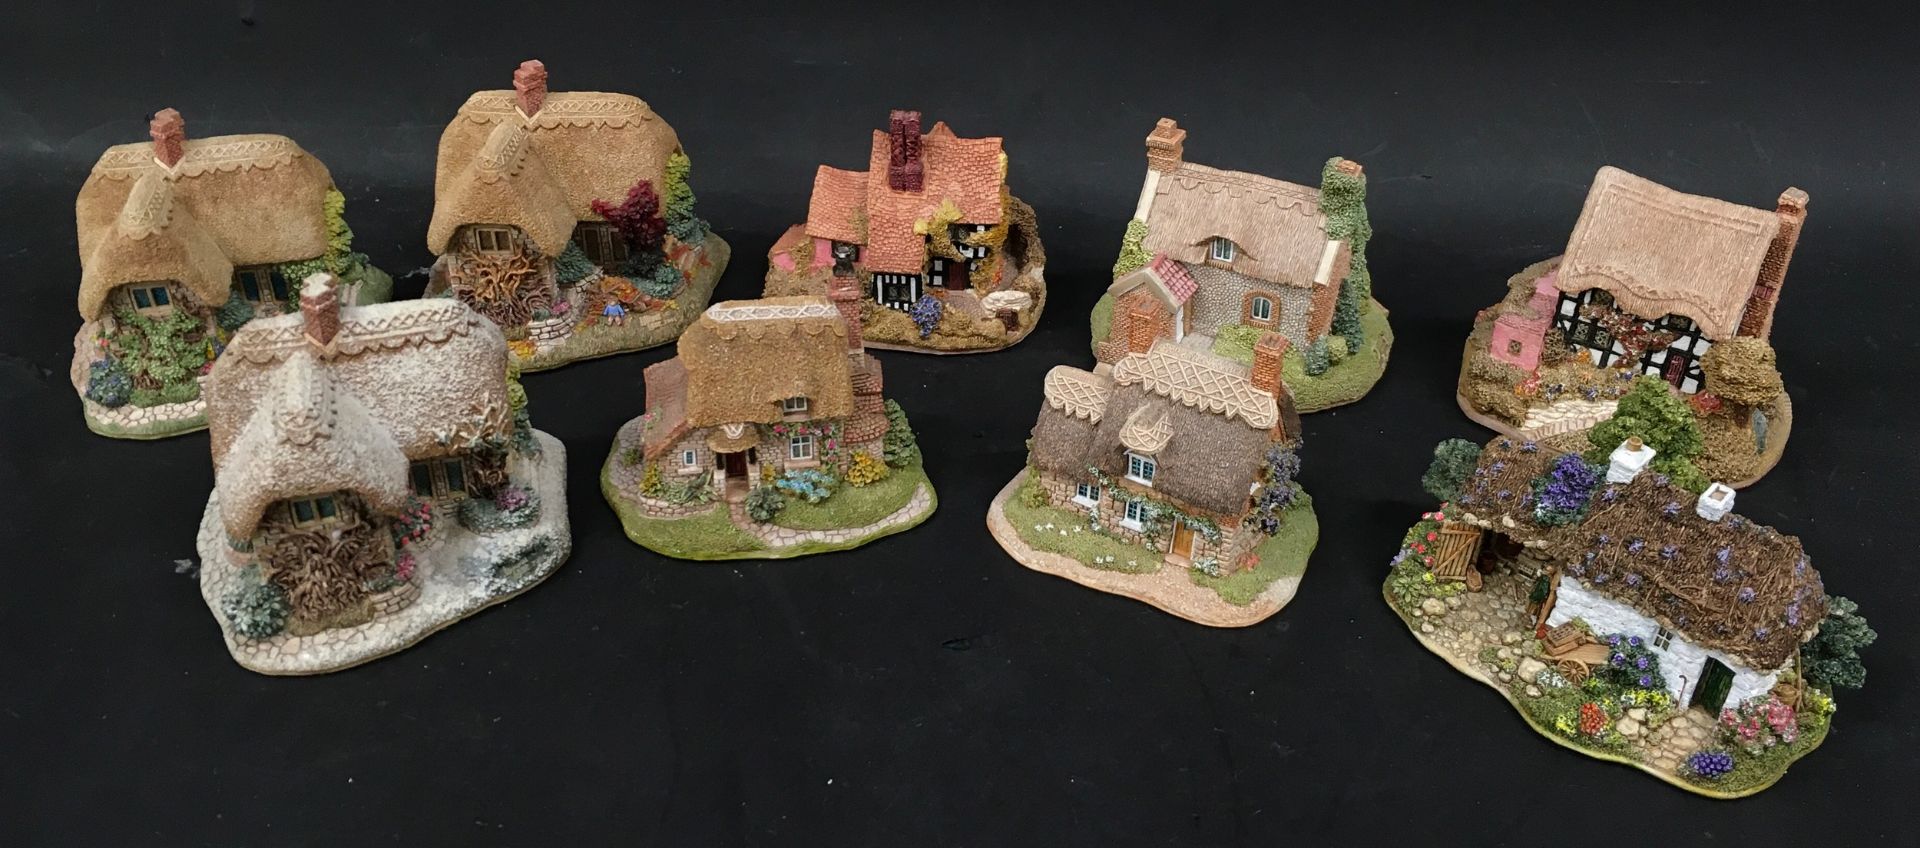 Lilliput Lane to include A year in an English Garden summer, autumn, winter, Ploghmans cottage etc.